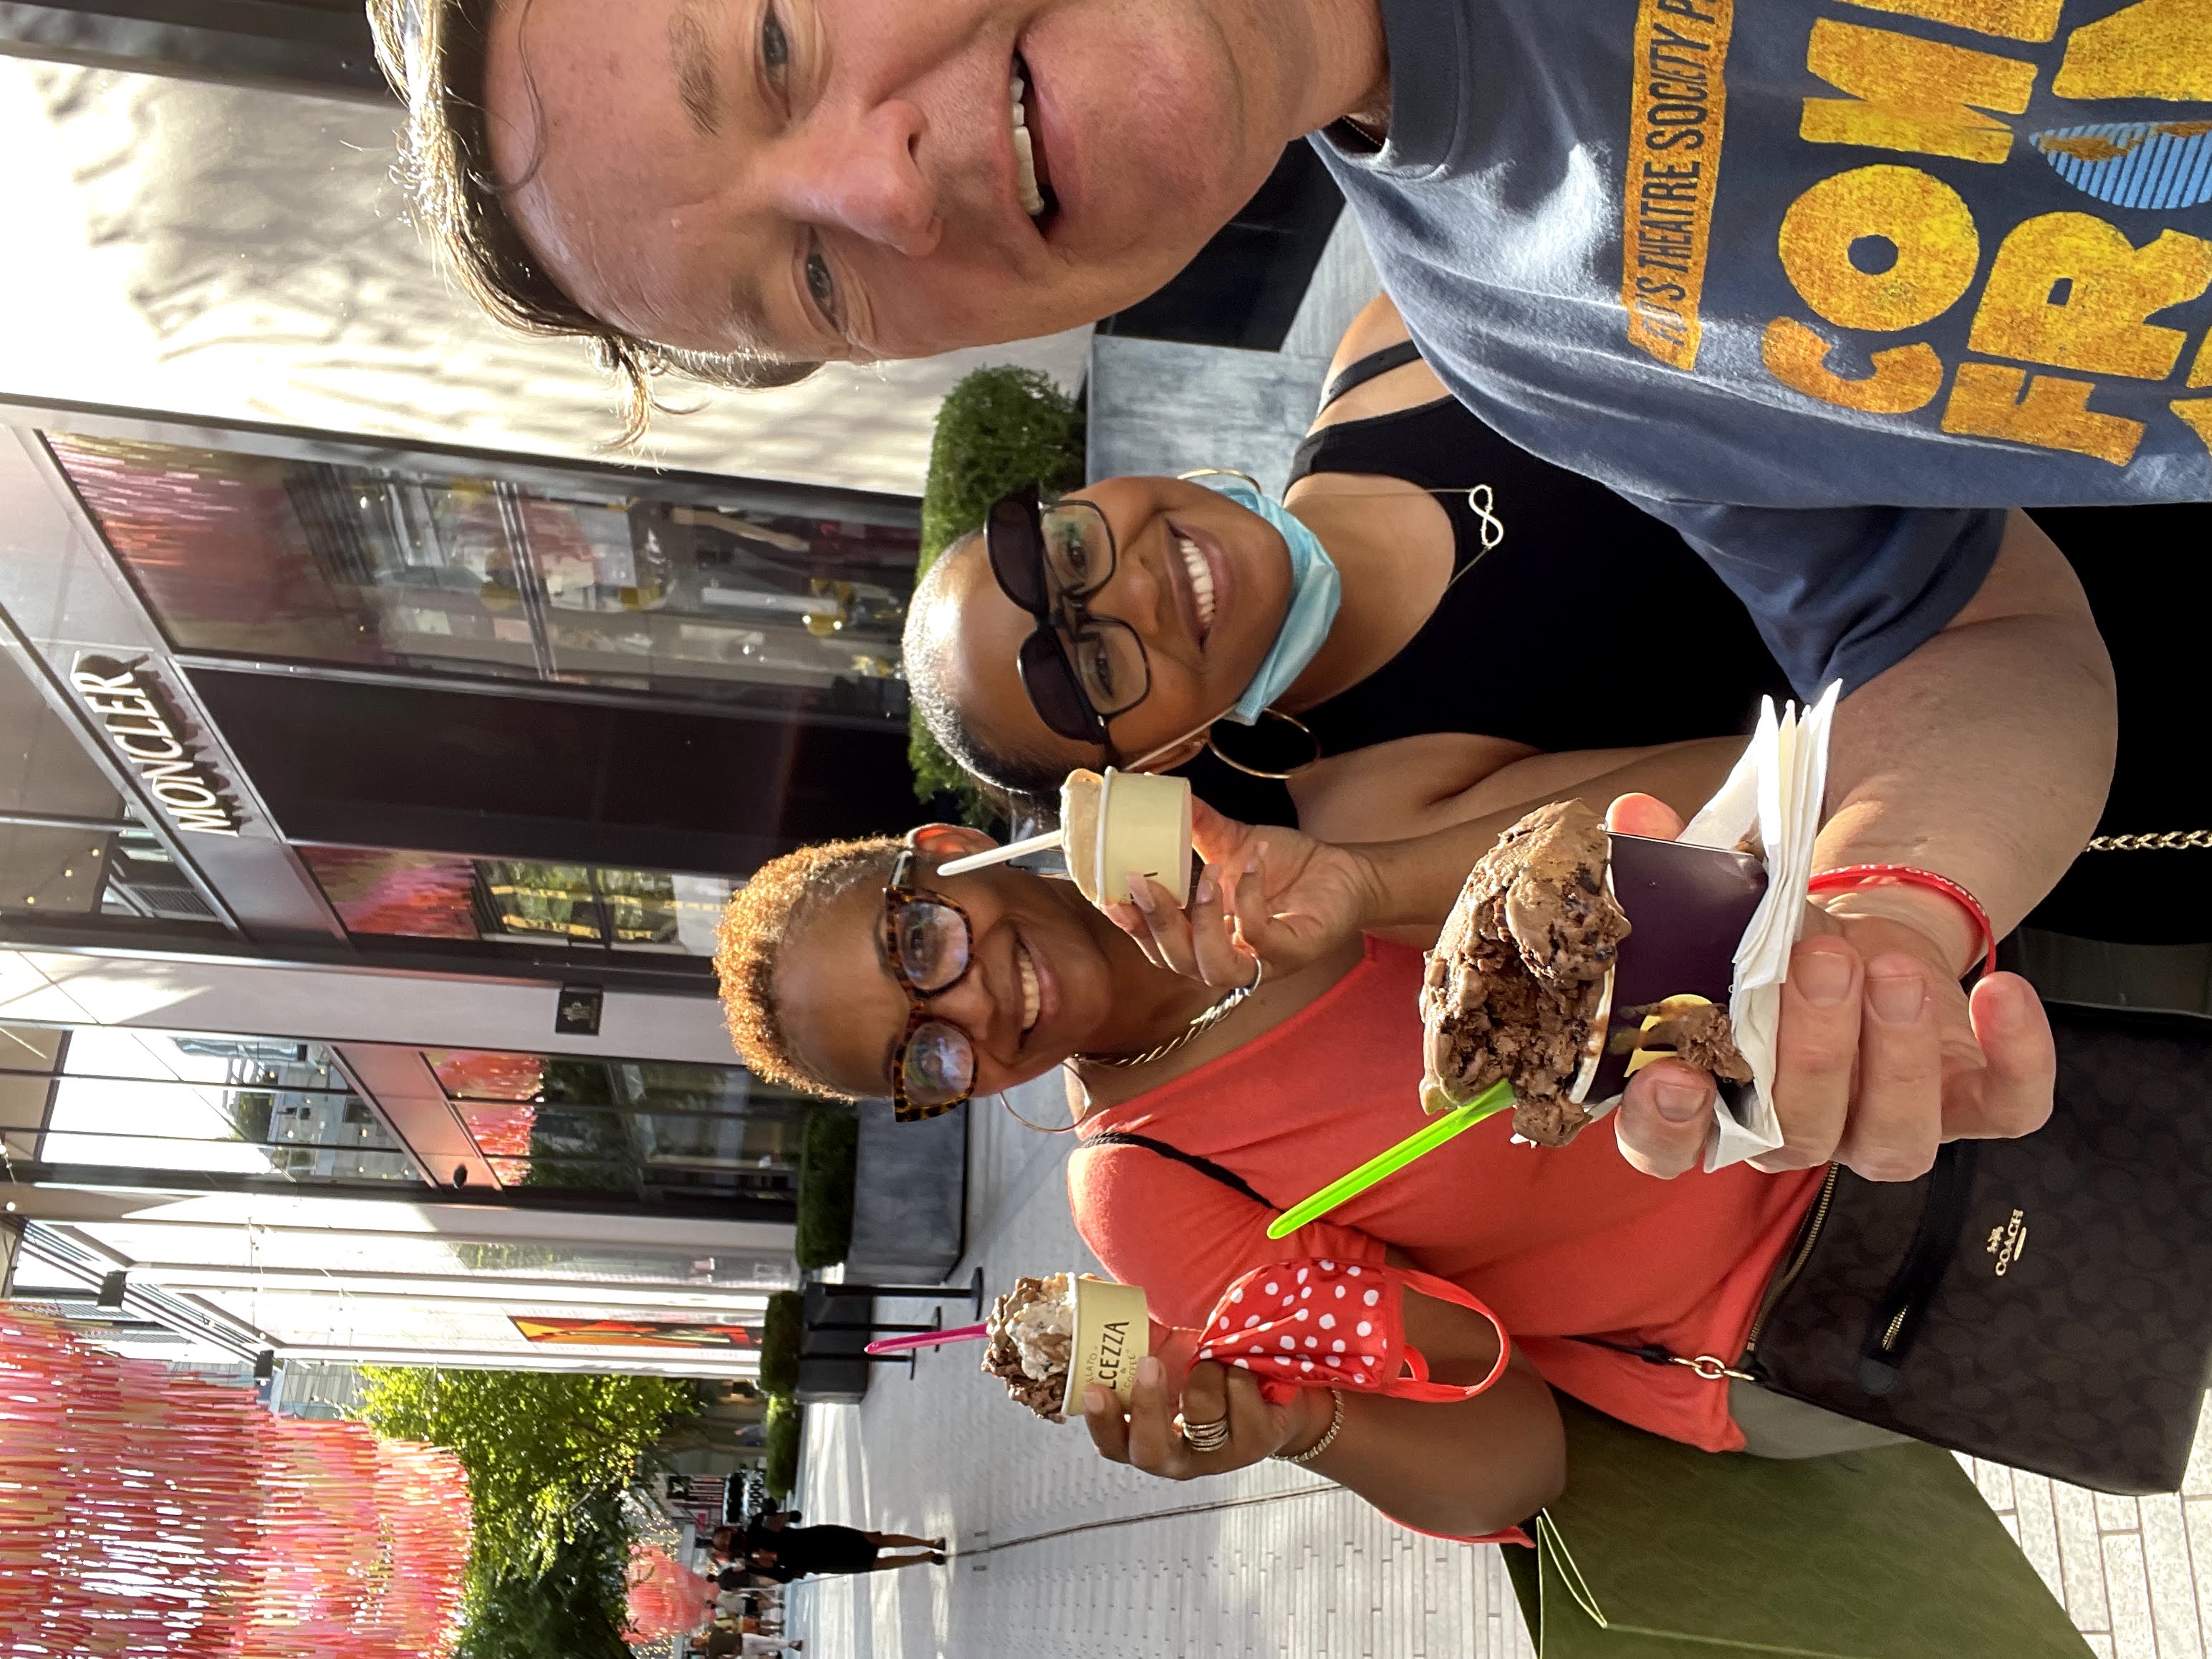 Kevin with 2 women and ice cream